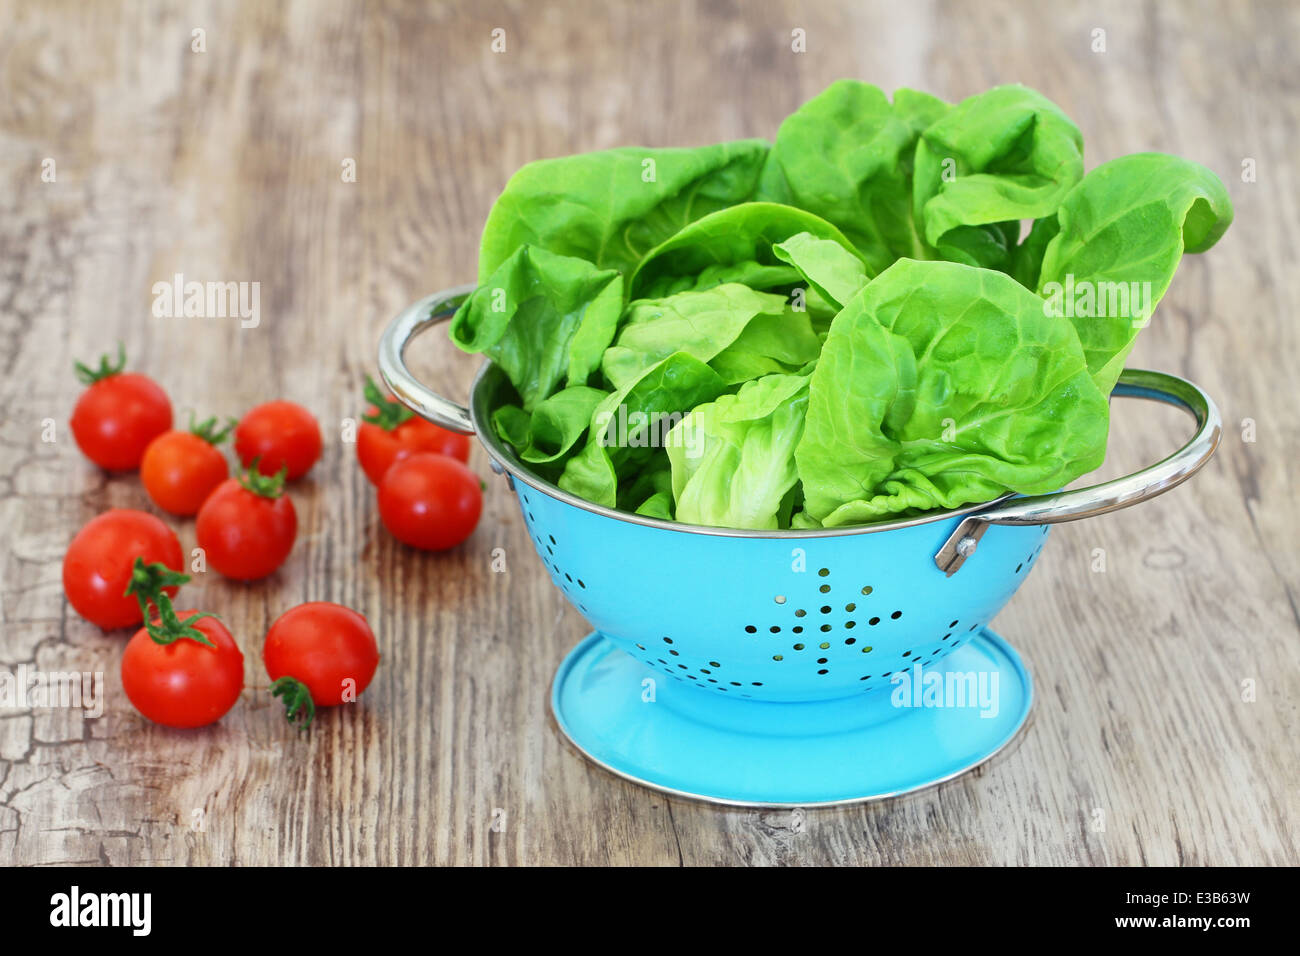 Green lettuce leaves in blue colander and cherry tomatoes Stock Photo